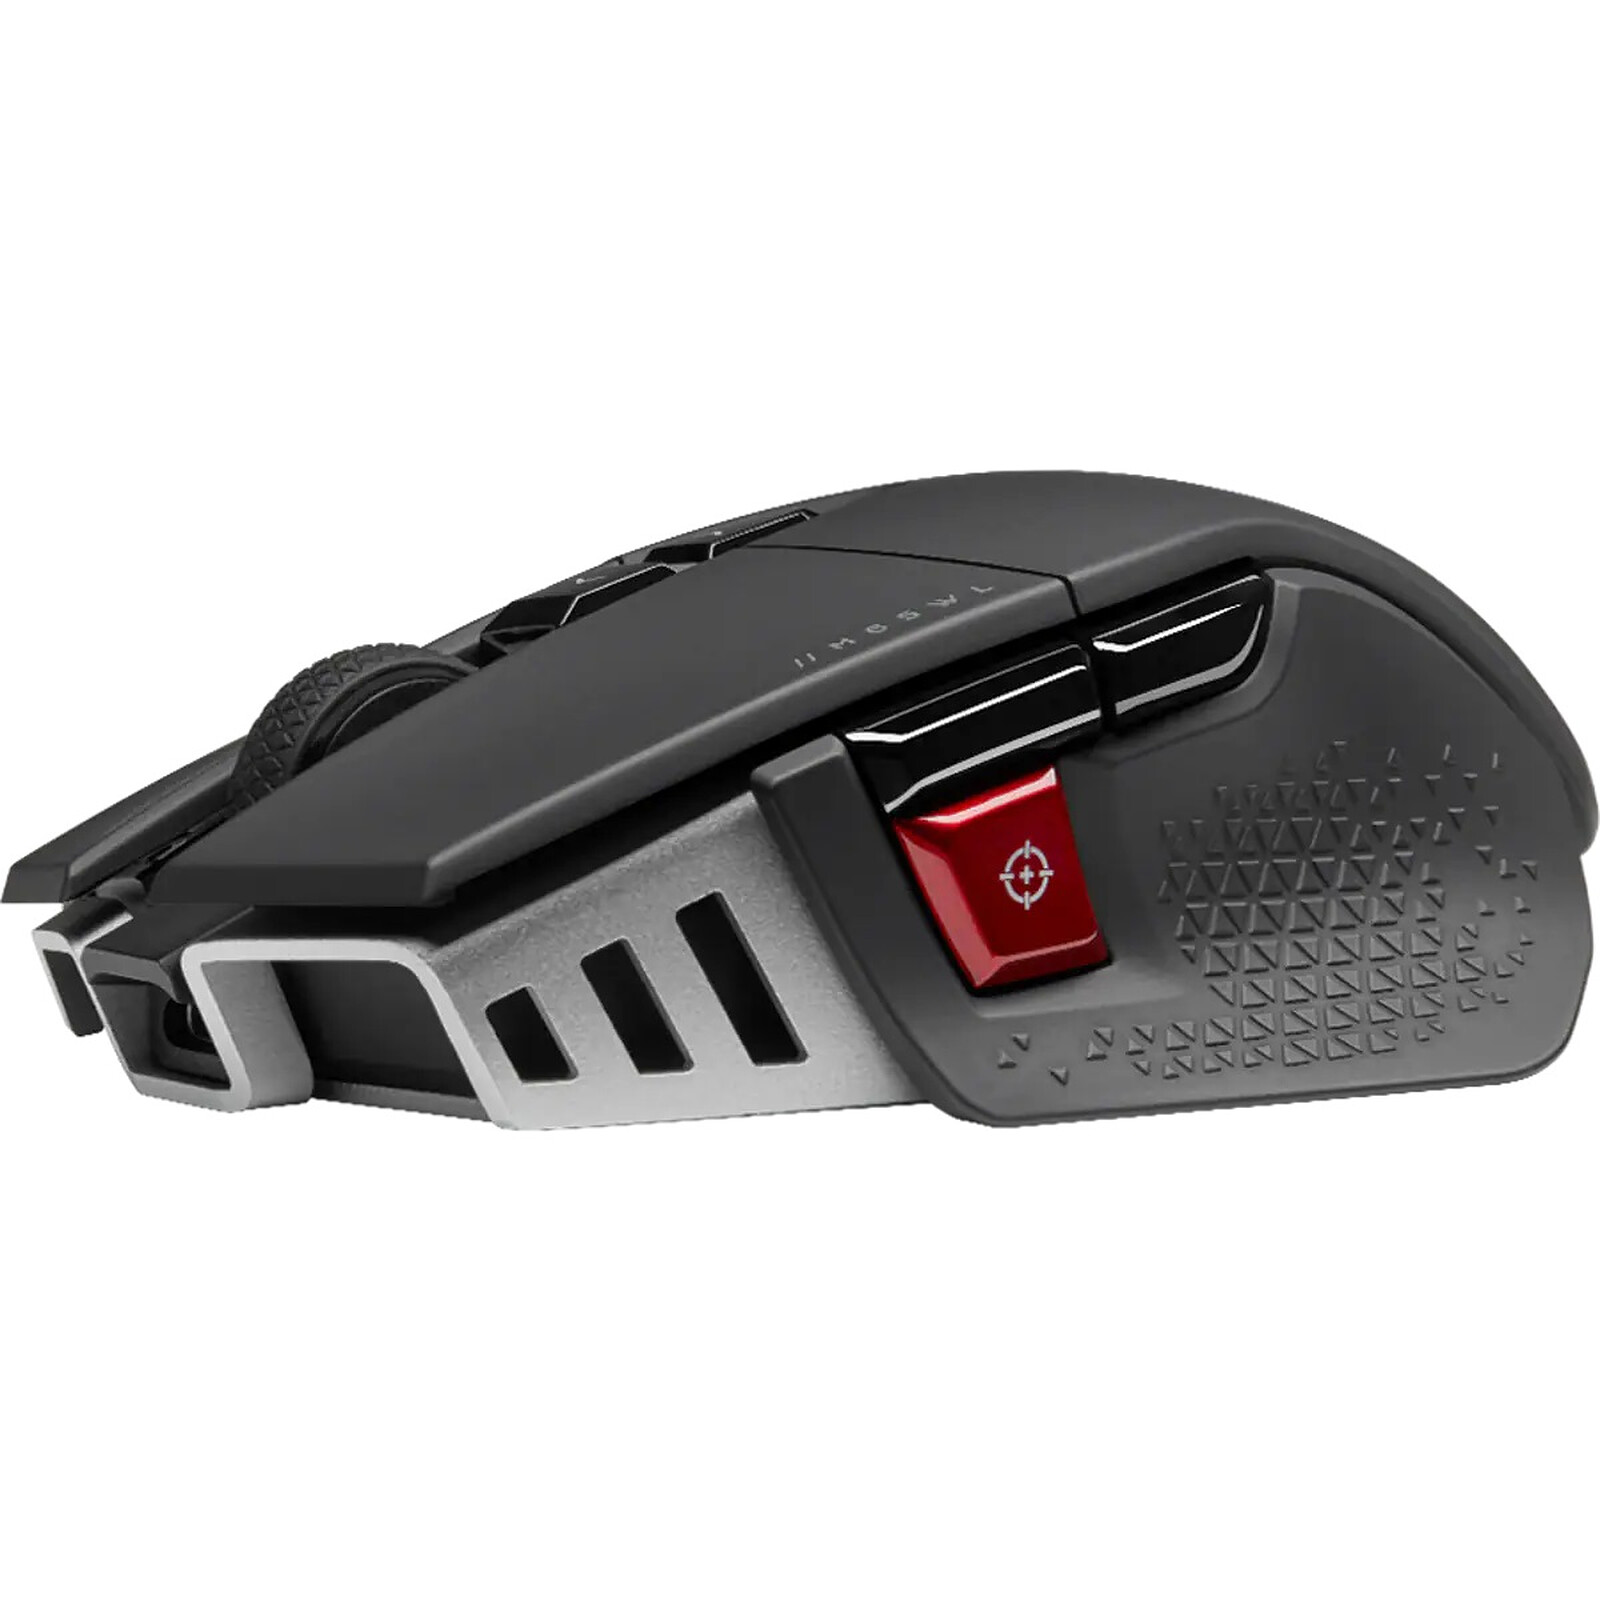 Corsair Gaming M65 RGB Ultra Wireless - Mouse - LDLC 3-year warranty